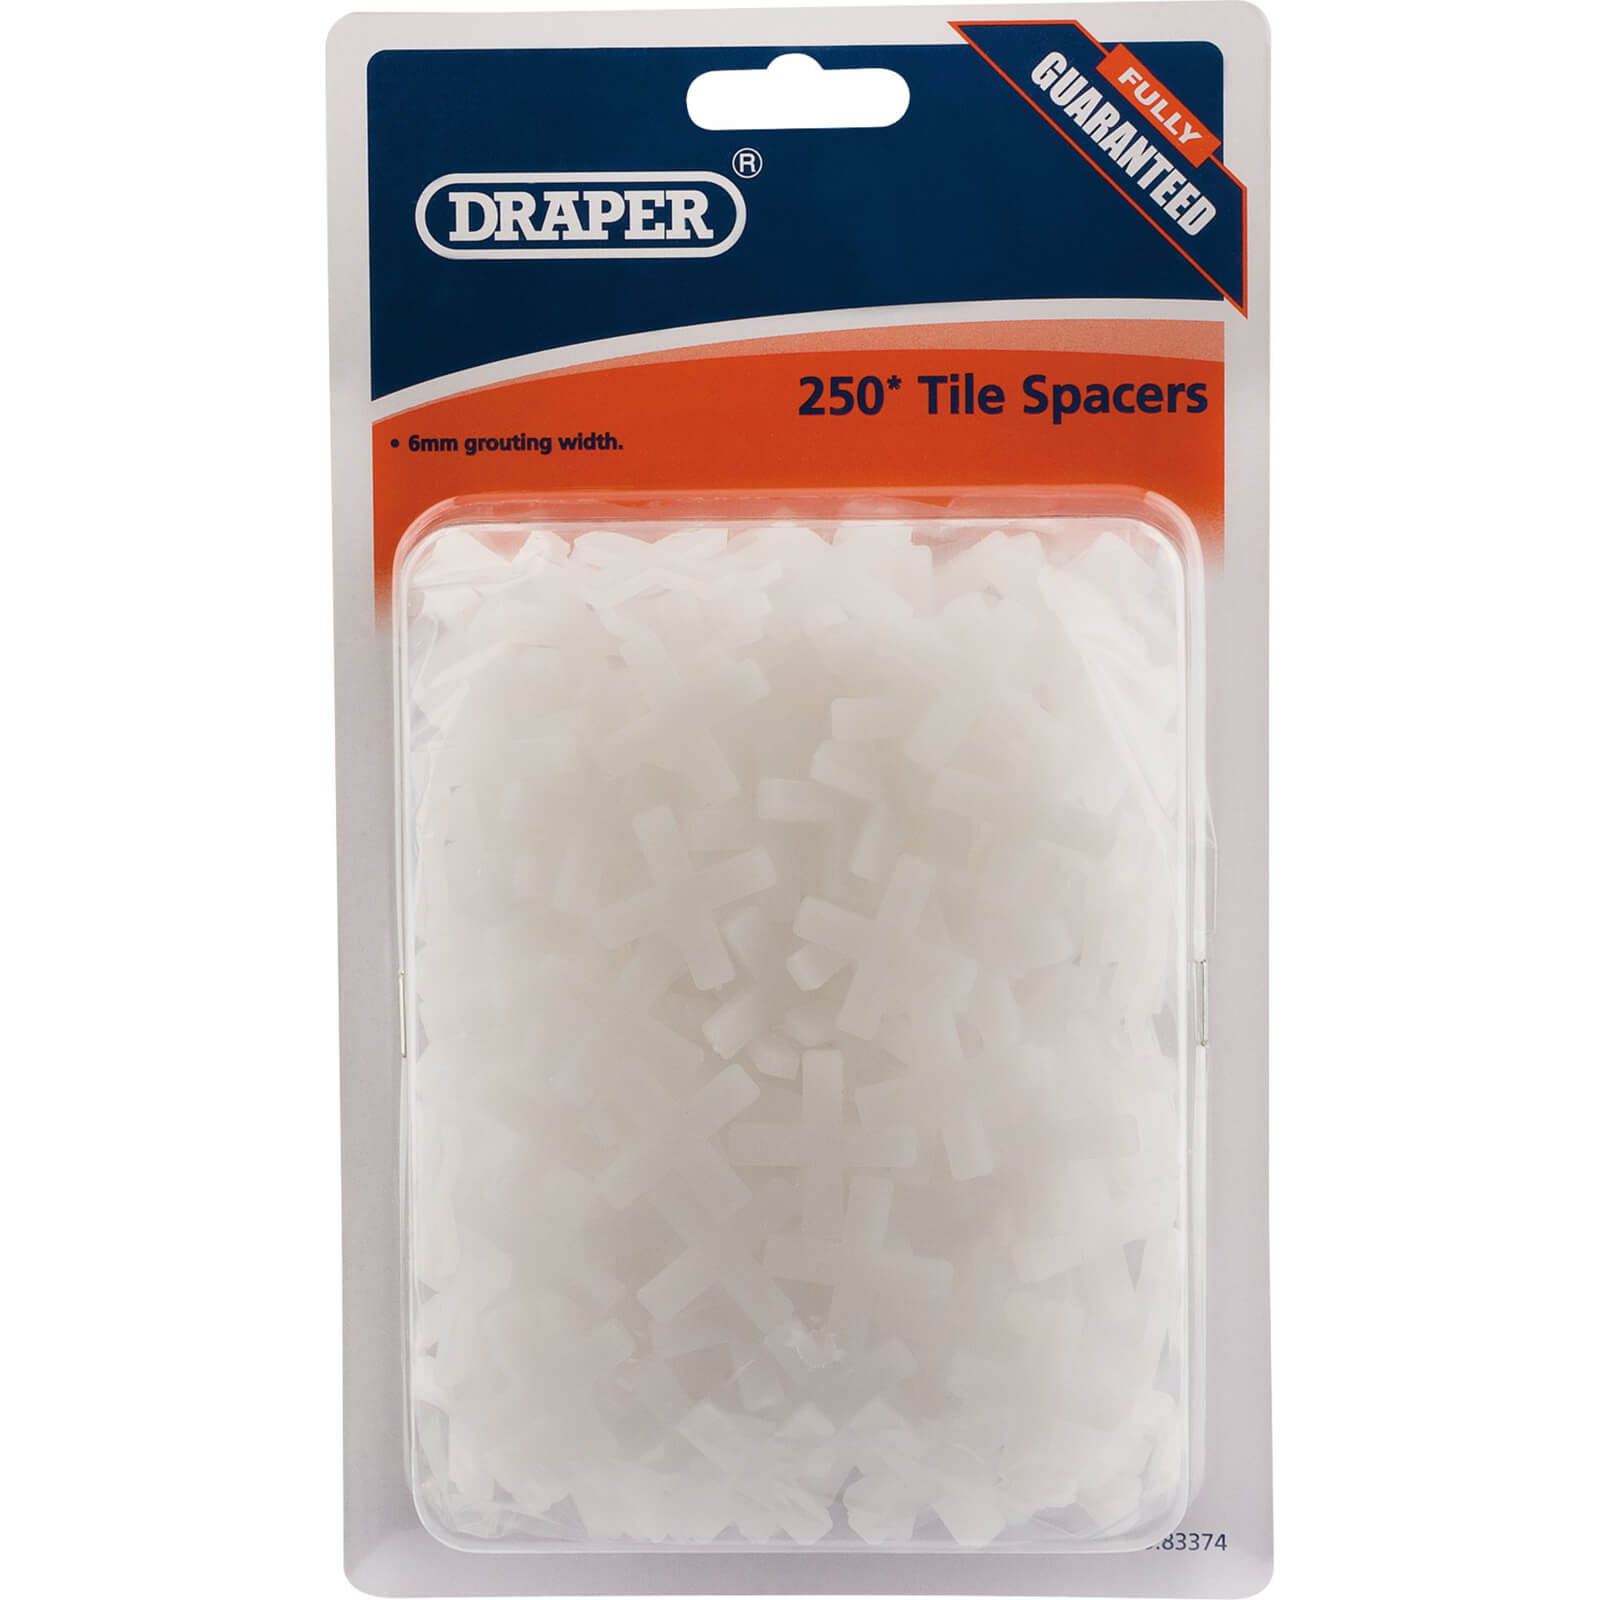 Photo of Draper Tile Spacers 6mm Pack Of 250